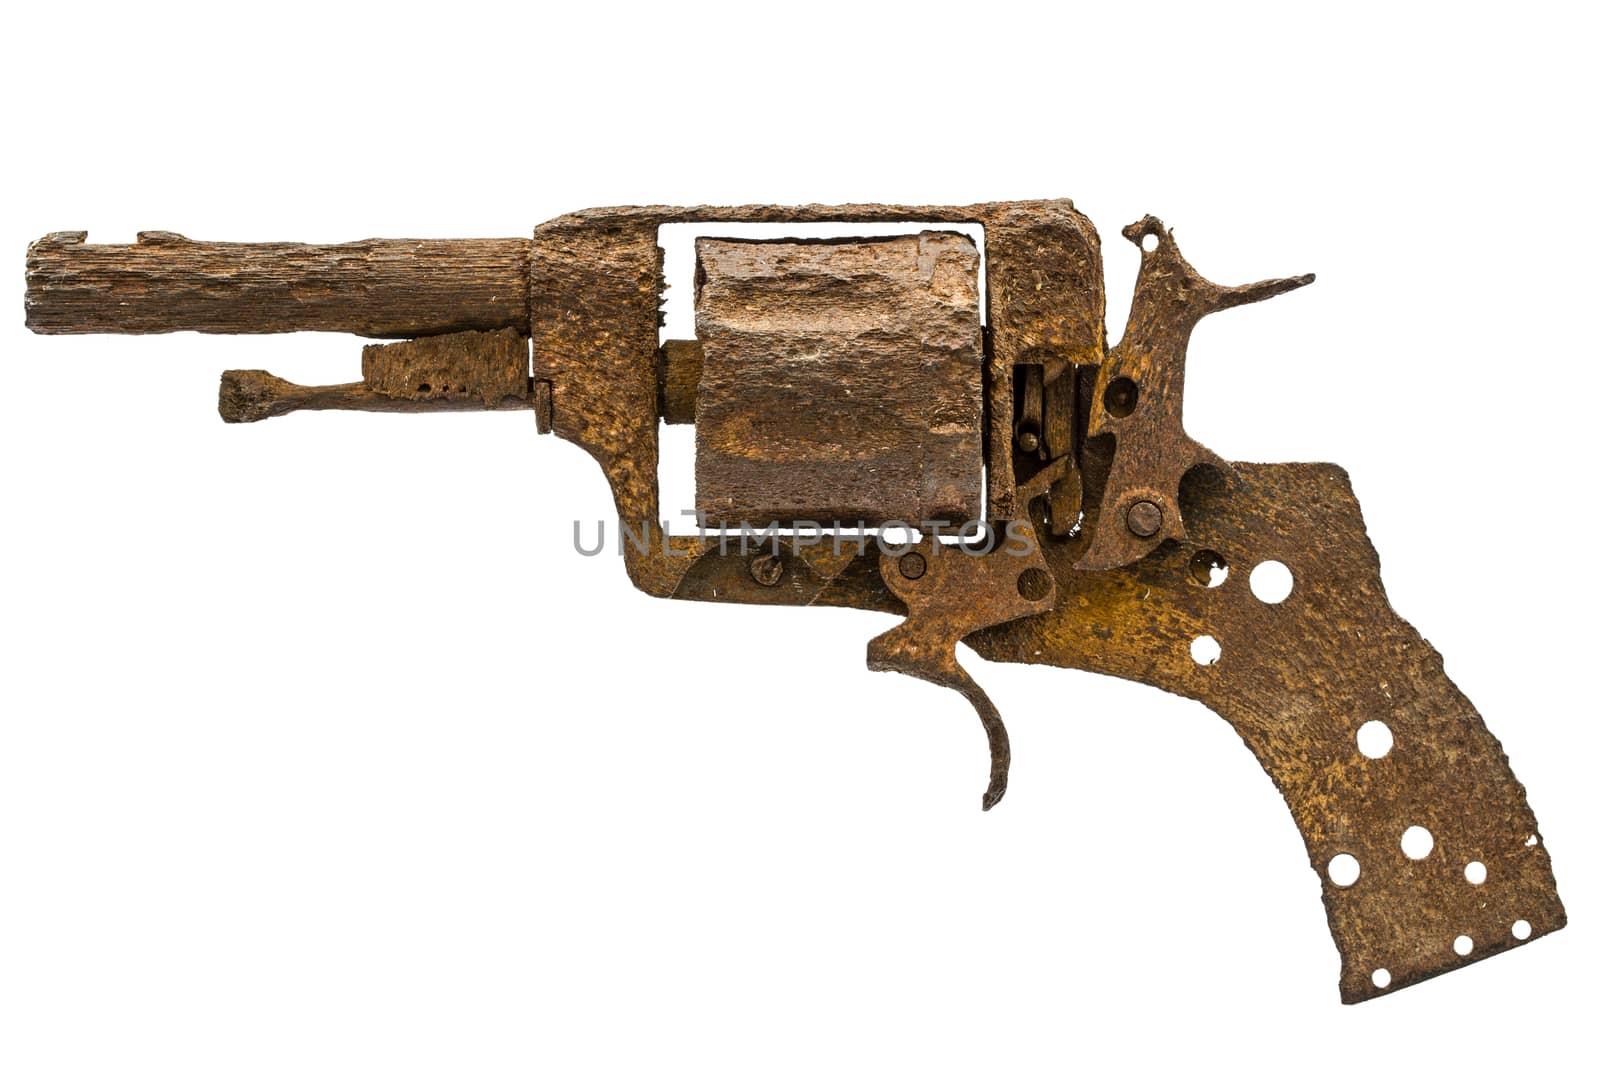 Old rusty pistol, Isolated on white background